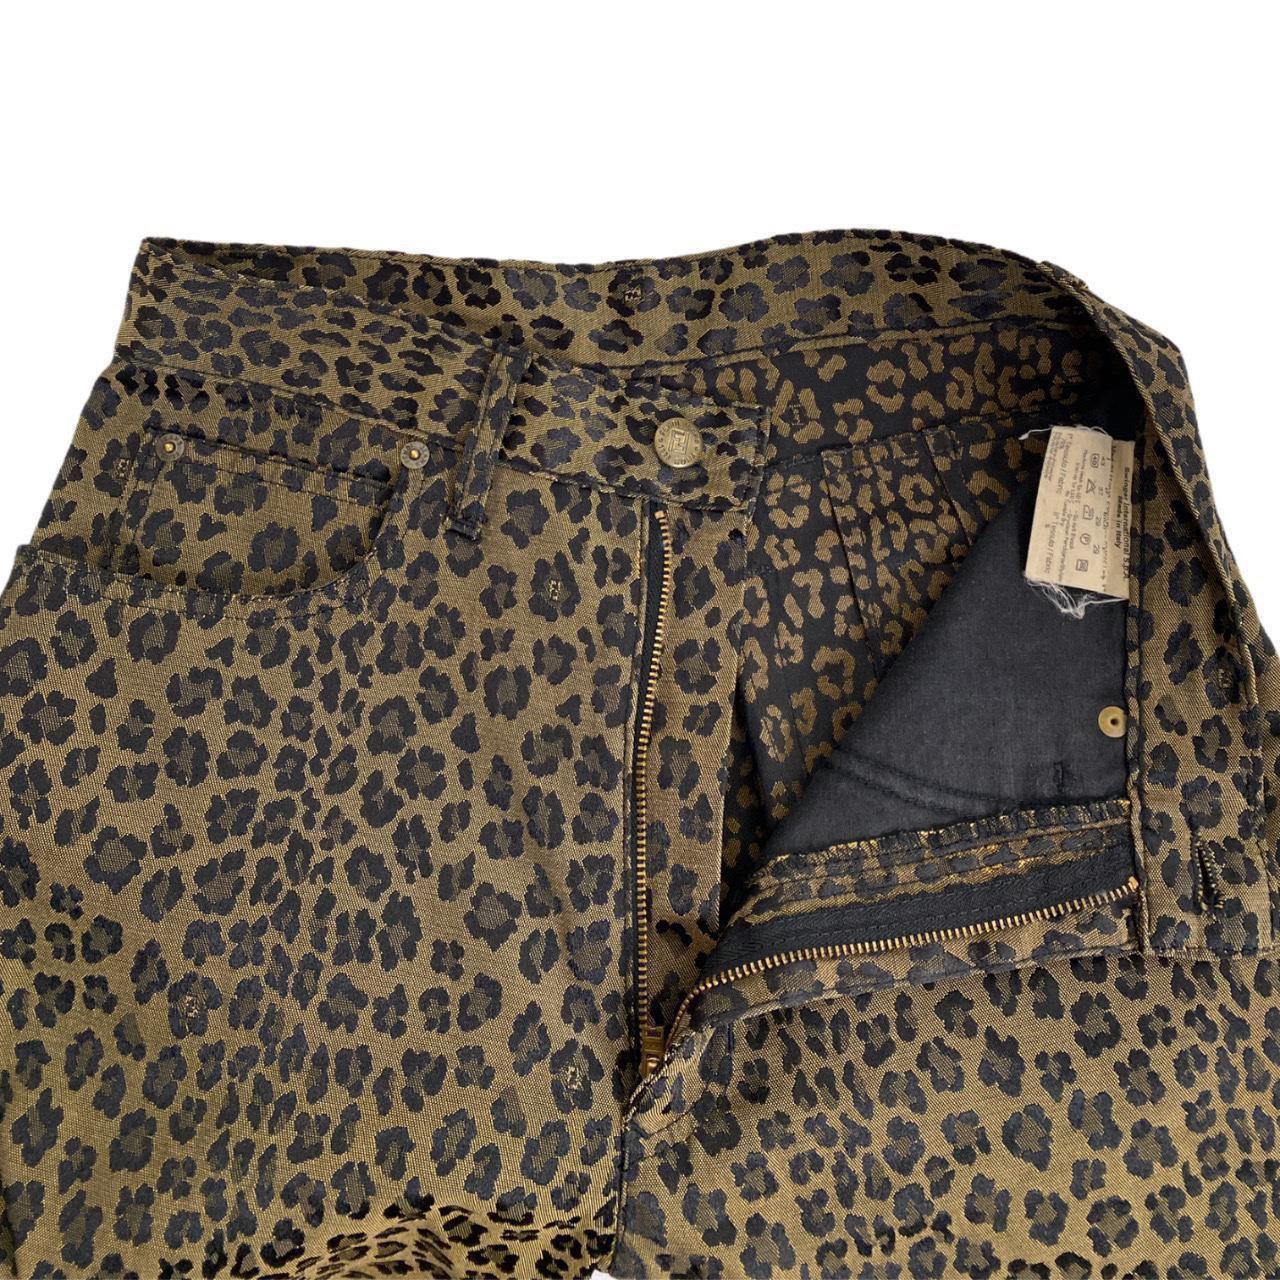 Fendi Trousers   Leopard High-Waisted Jeans In Good Condition For Sale In London, GB